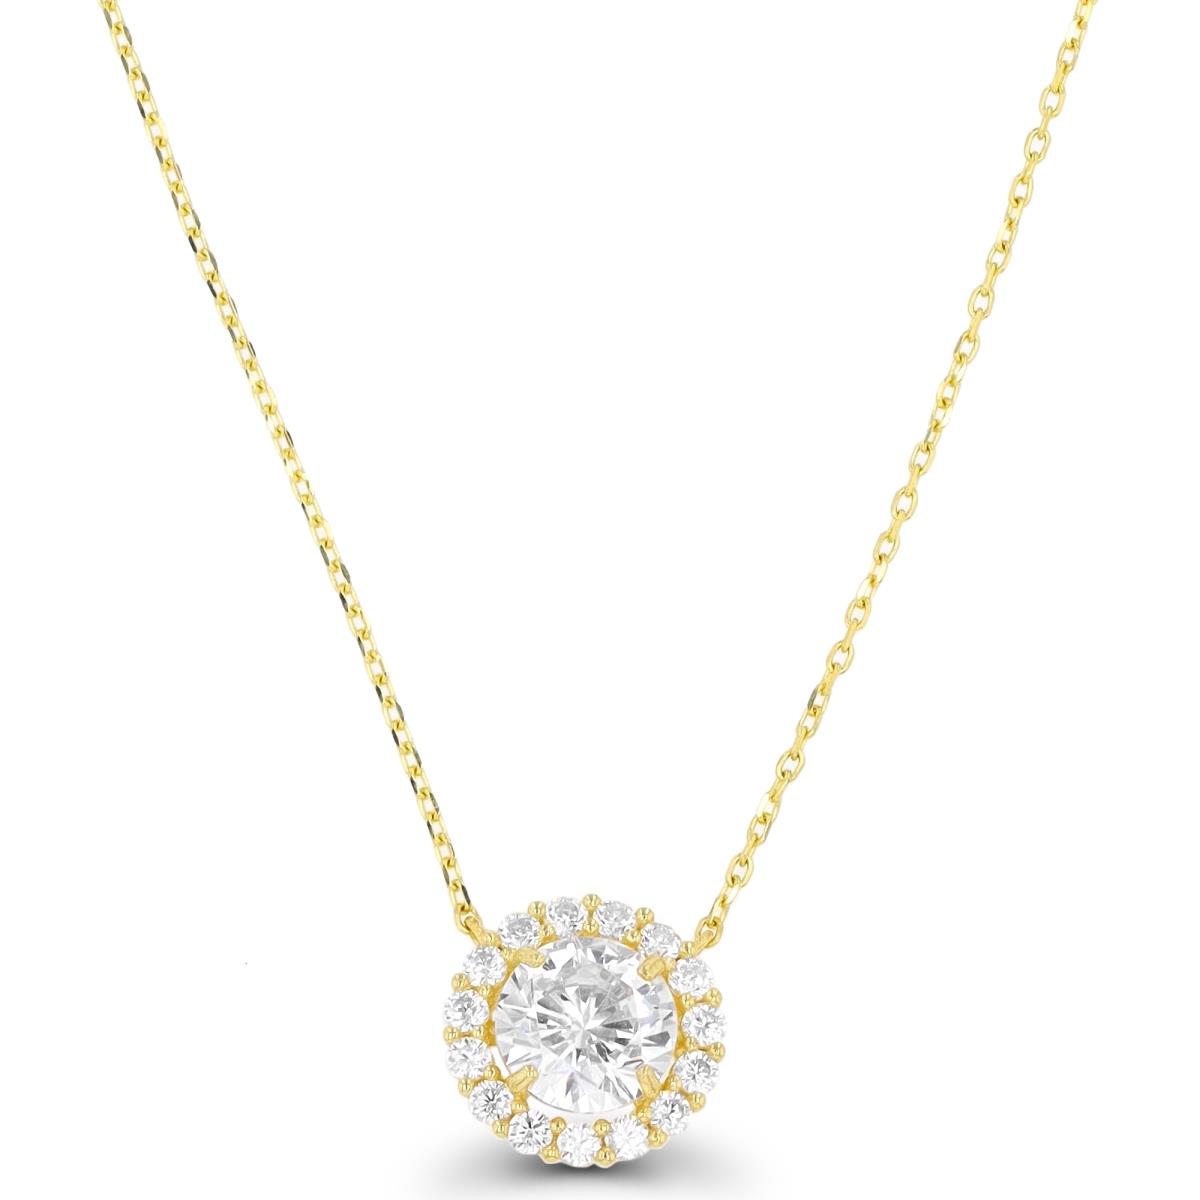 14K Yellow Gold 9x9mm Round CZ Halo 16"+2" Necklace